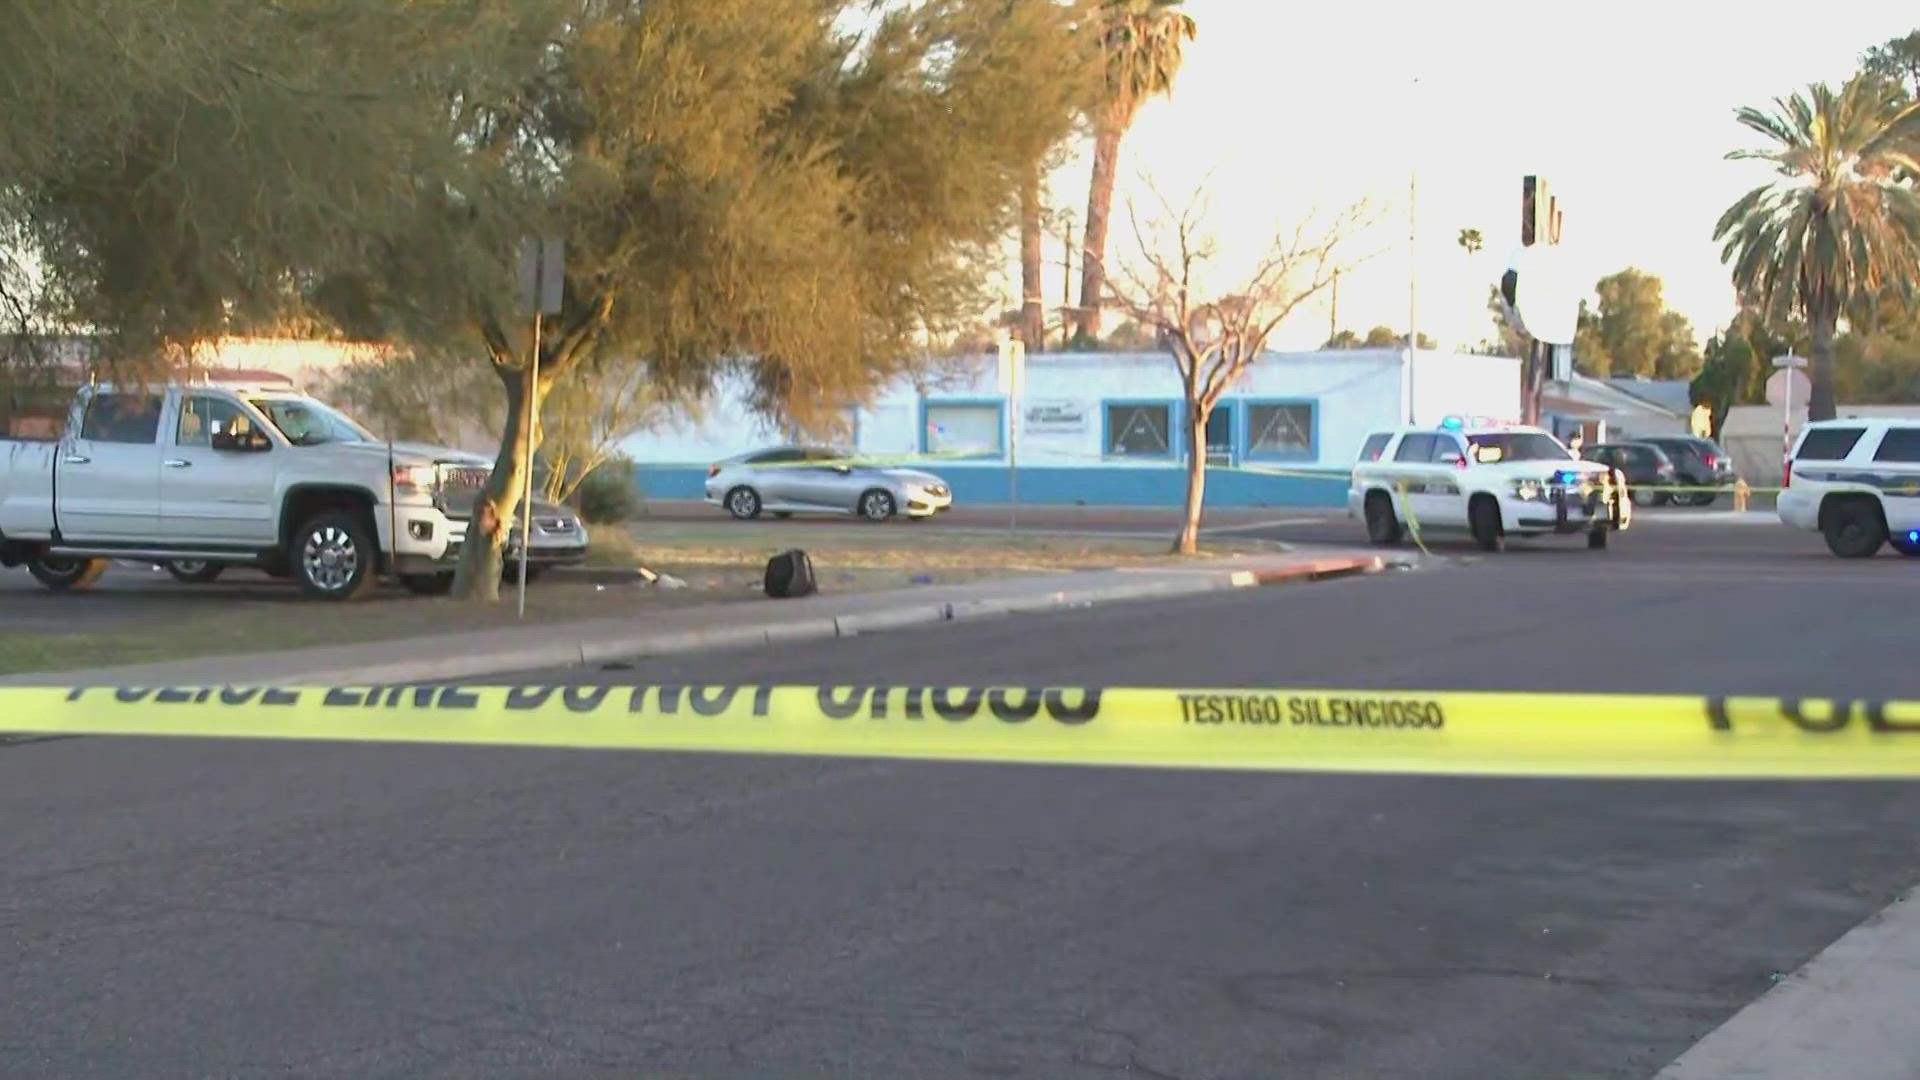 Phoenix police said a man and a woman were found suffering gunshot wounds in the parking lot of a business near 35th Street and Thomas Road.